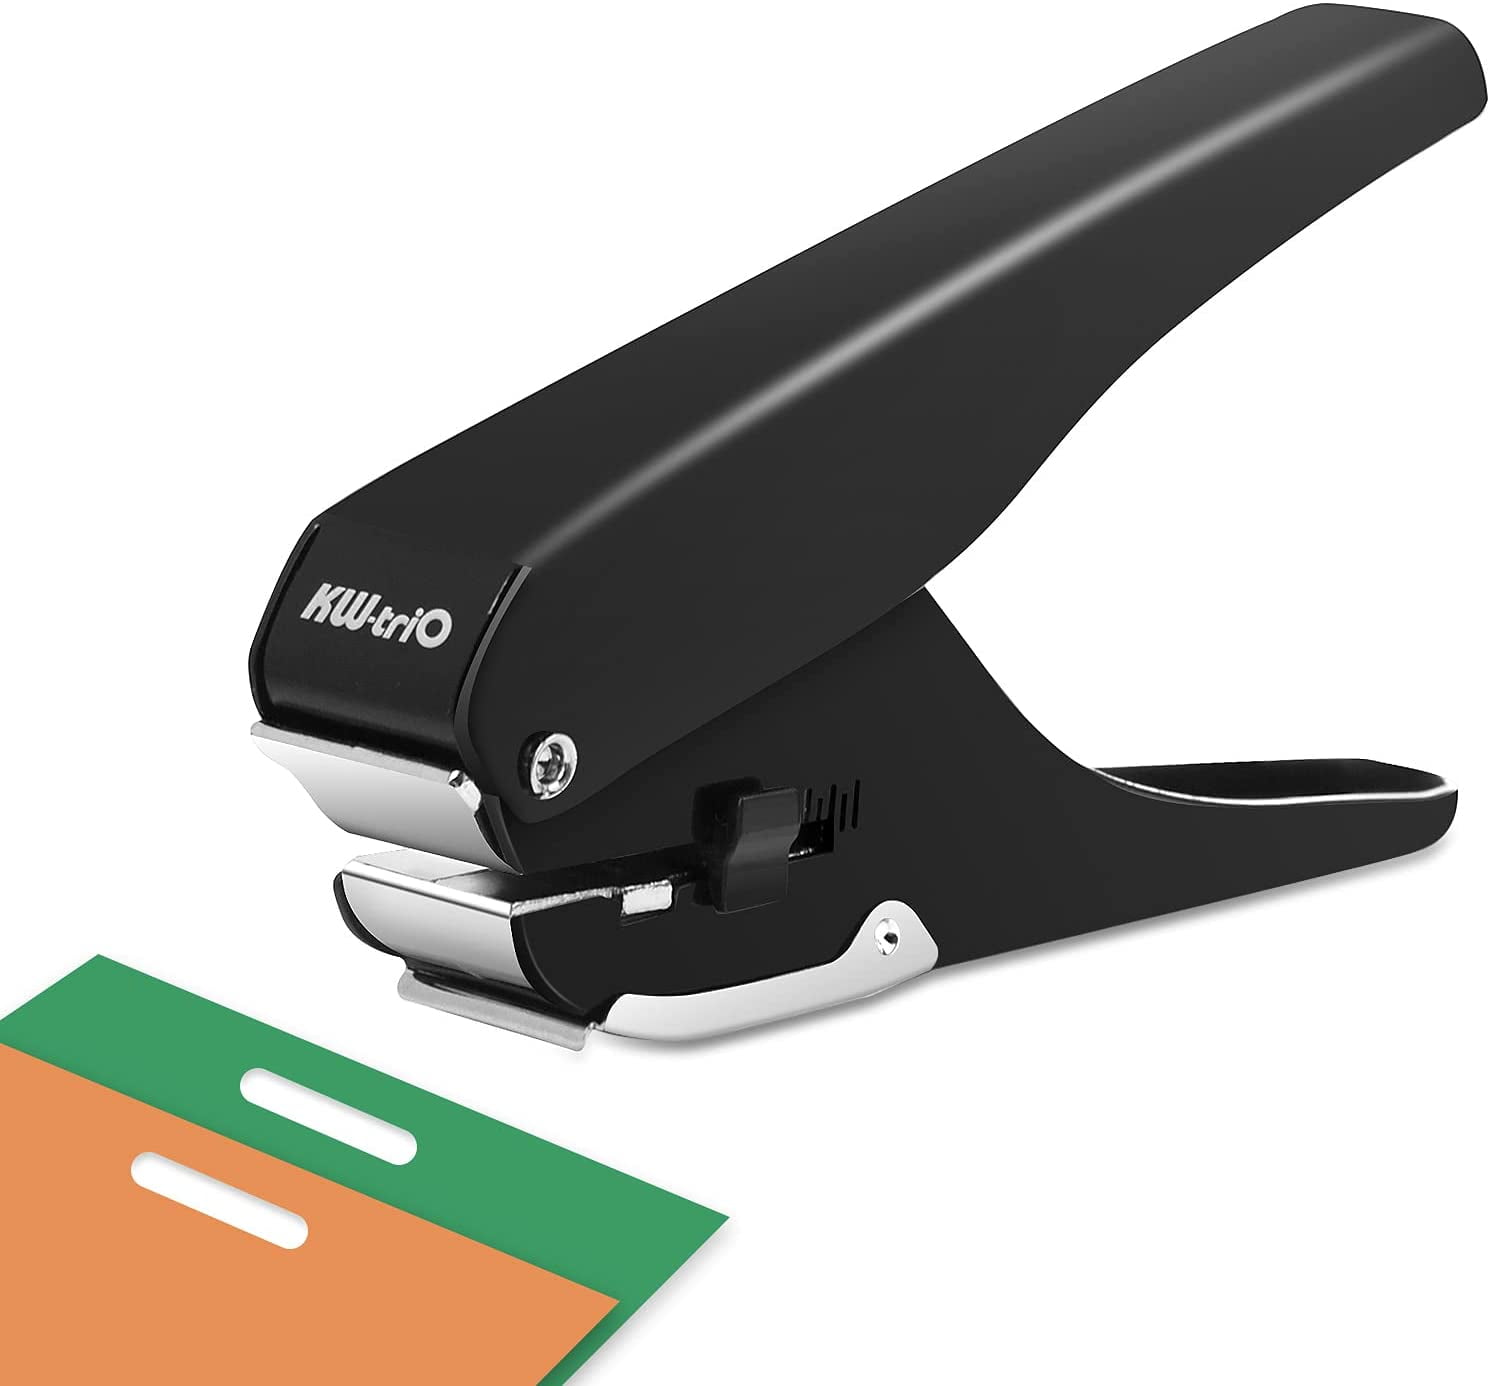 Single Hole Punch, Heavy Duty Hole Puncher for Crafts Tags Paper ID Cards  PVC Cardboard (1/4 Inch Hole)